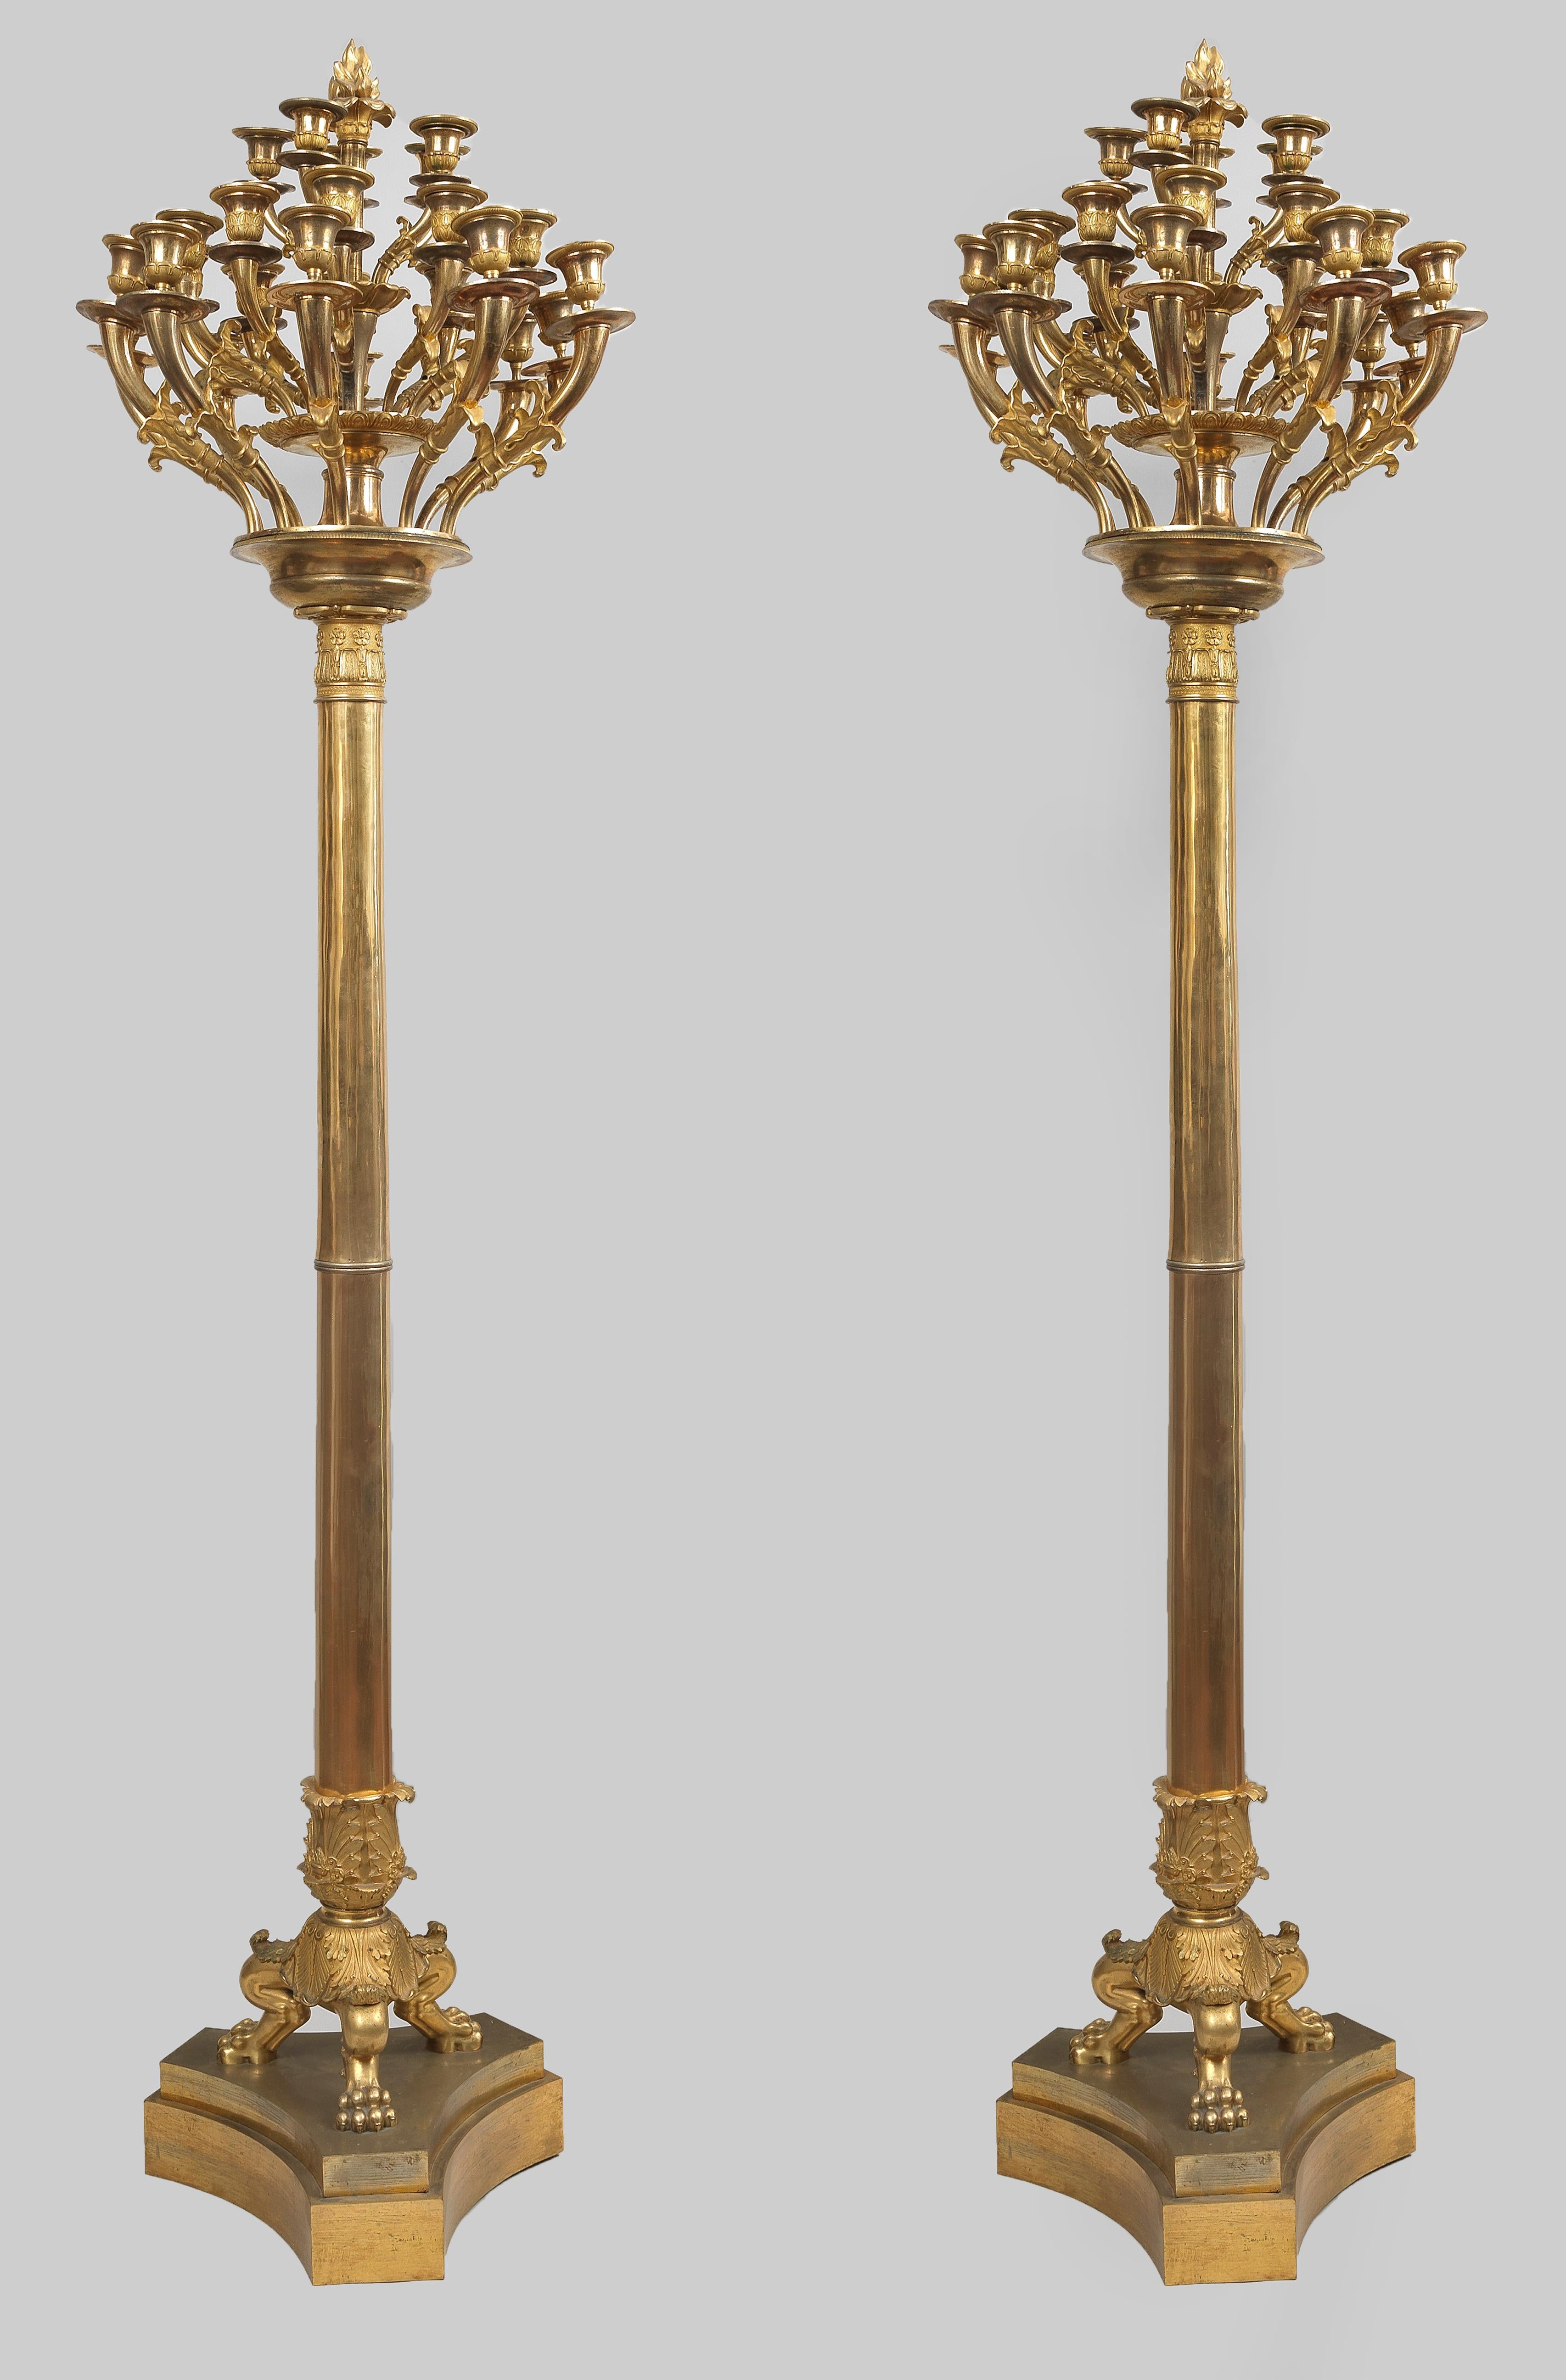 Impressive pair of Italian Empire finely chiseled ormolu Flambeaux, on triform base, each with 25 scrolled gilt-bronze candle arms. Attributed to Luigi Manfredini the famous bronze artist active in Milan in the early 19th century.

Measures: 185 x